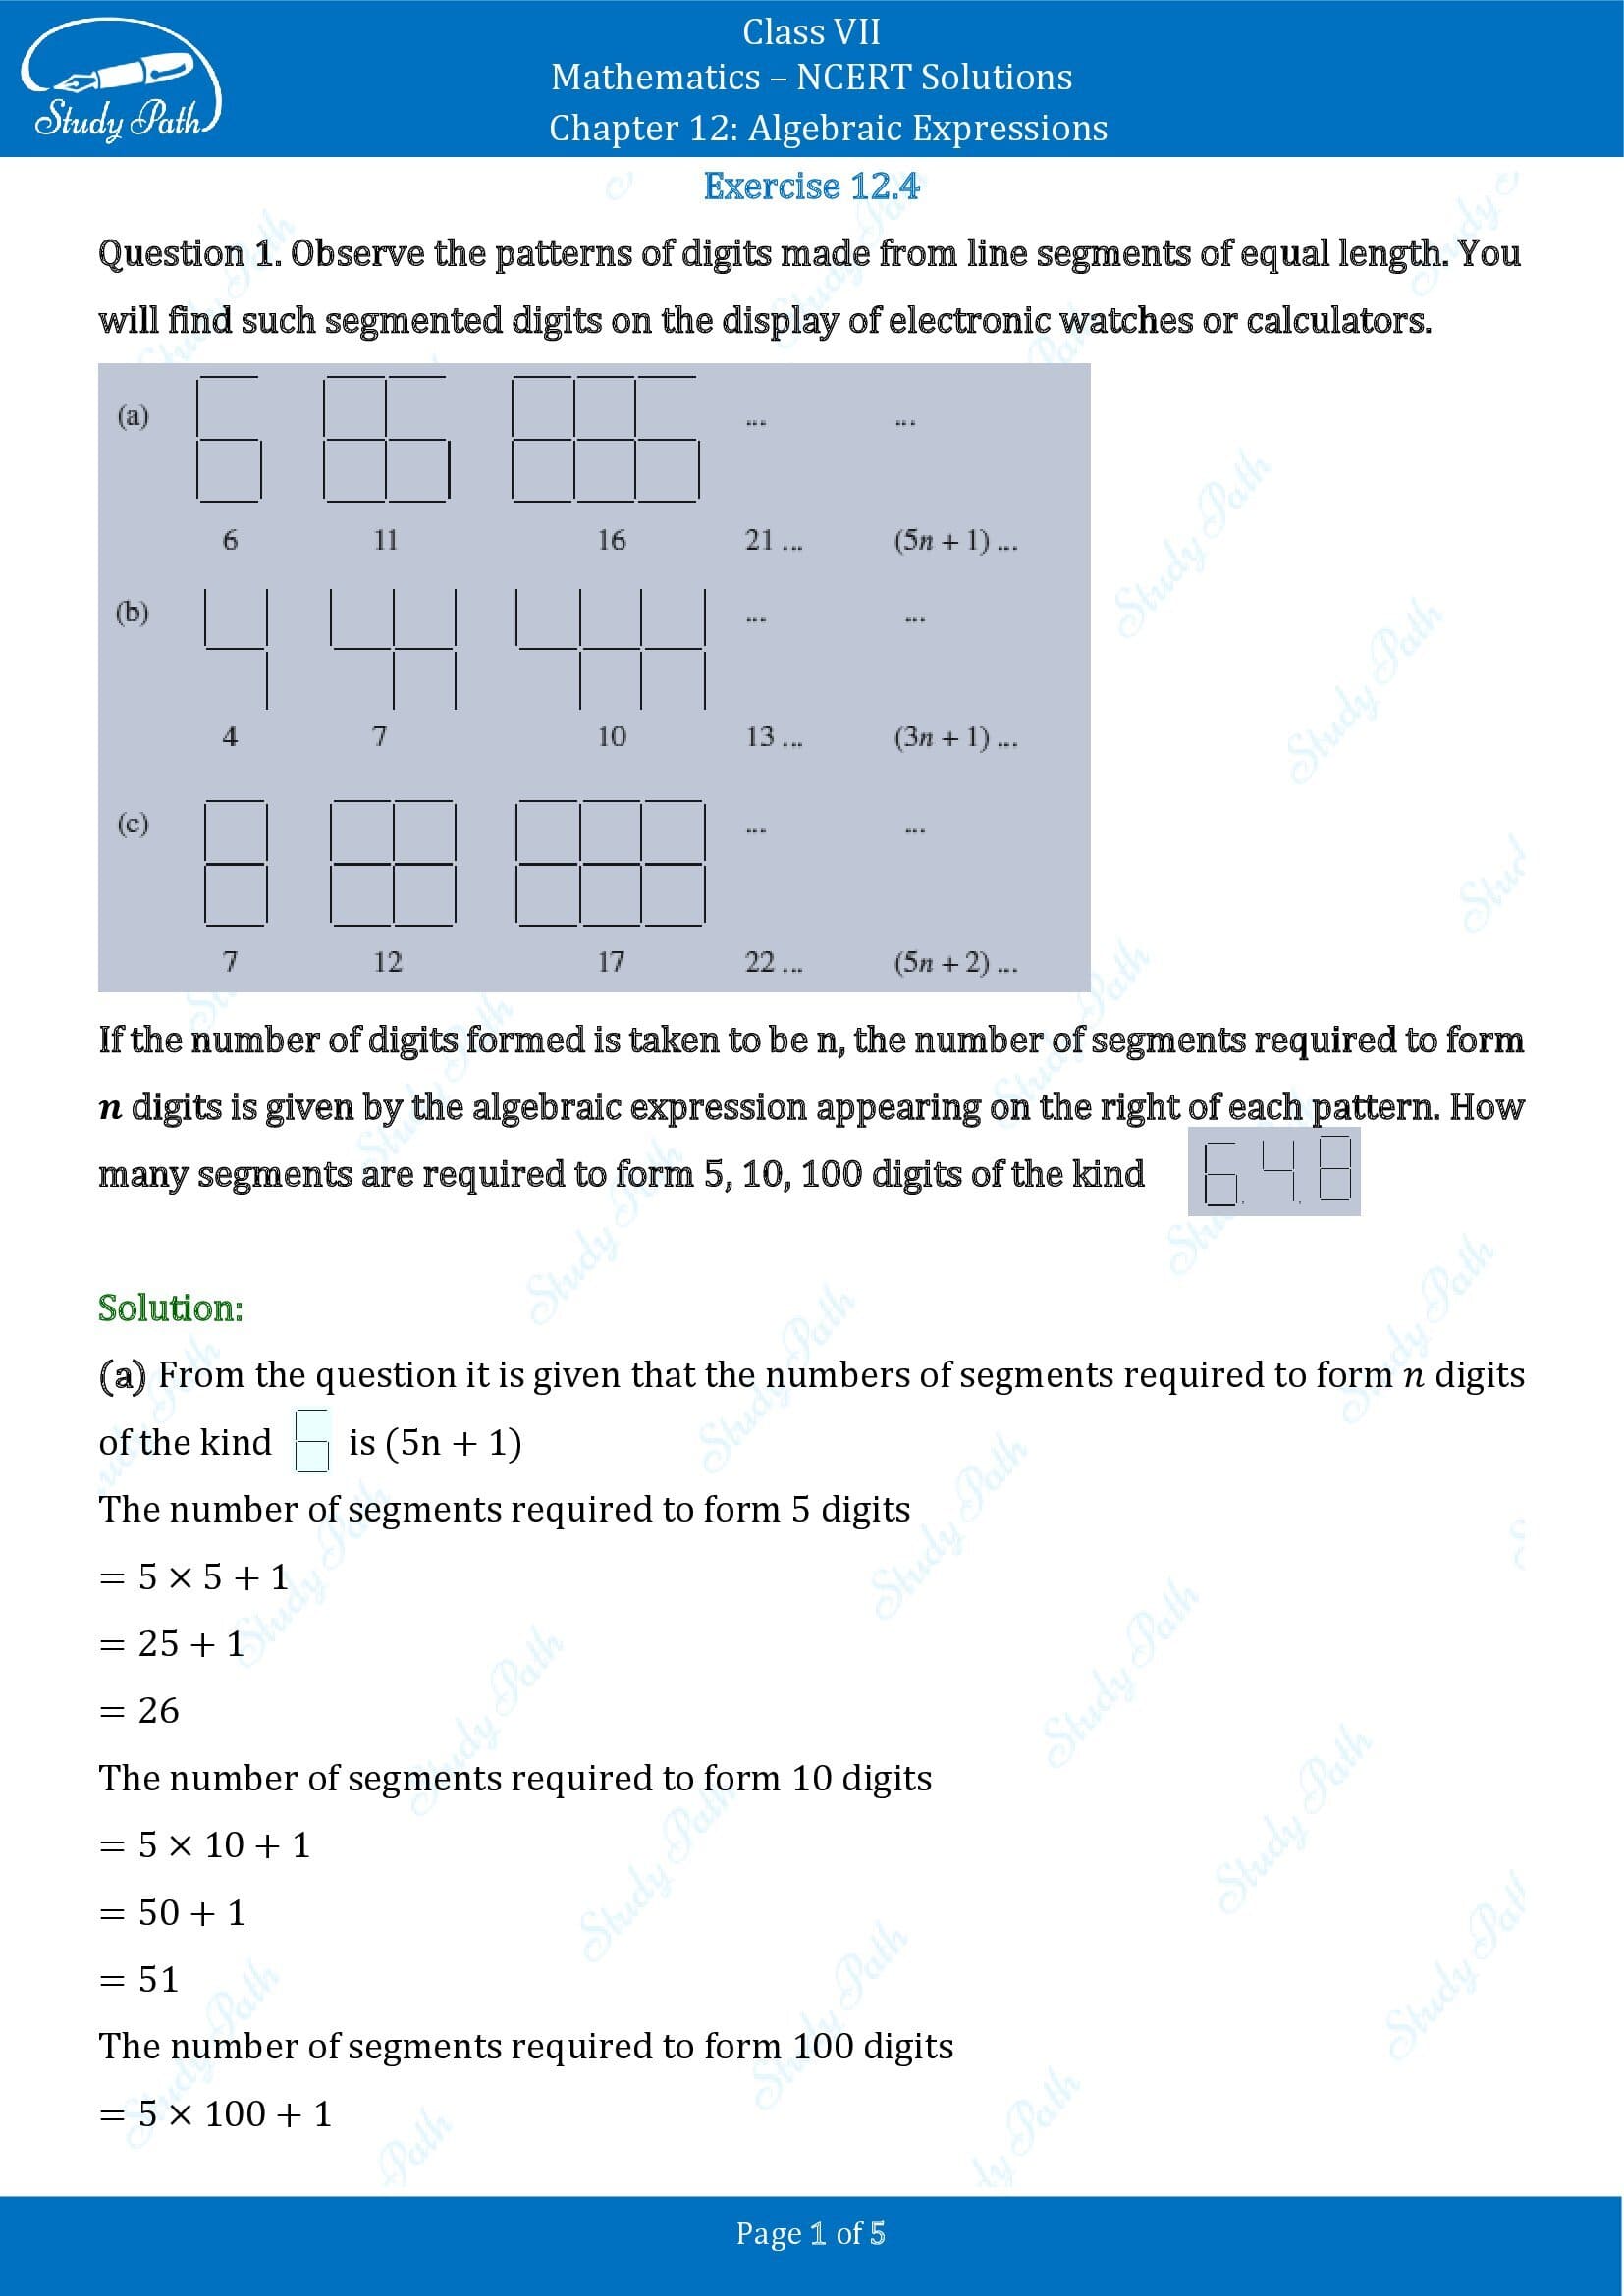 NCERT Solutions for Class 7 Maths Chapter 12 Algebraic Expressions Exercise 12.4 00001